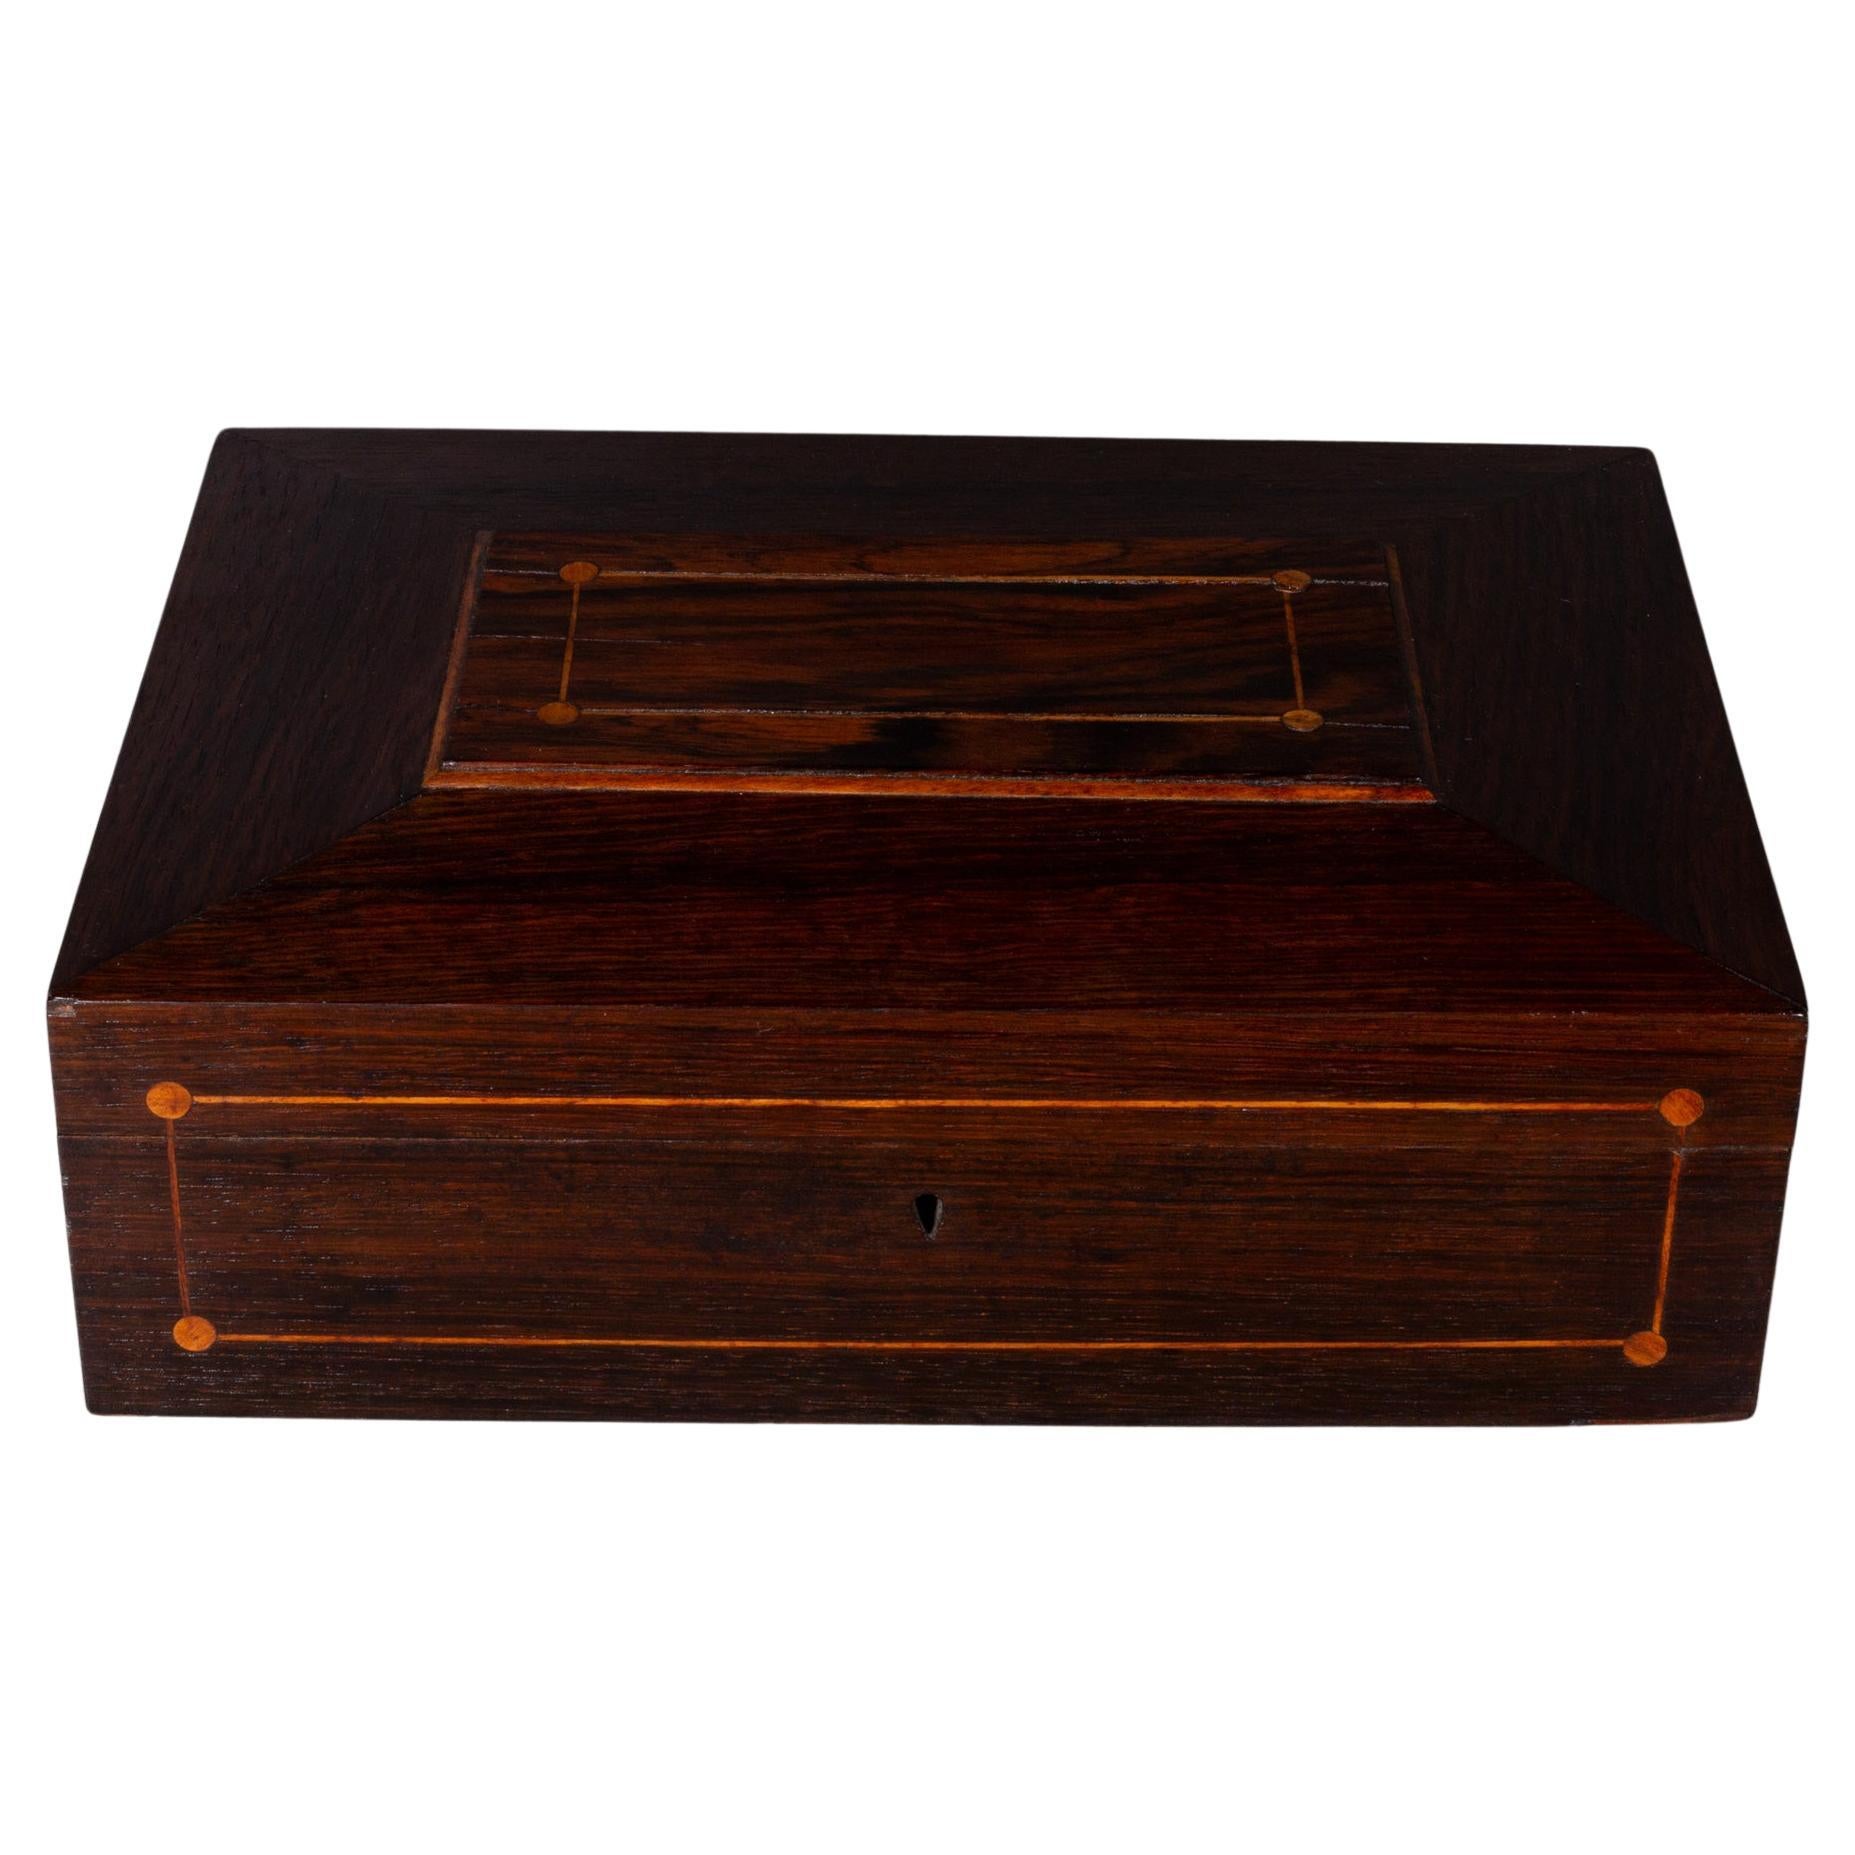 19th c. Shaker Inlay Sewing Box c.1800s (FREE SHIPPING) For Sale